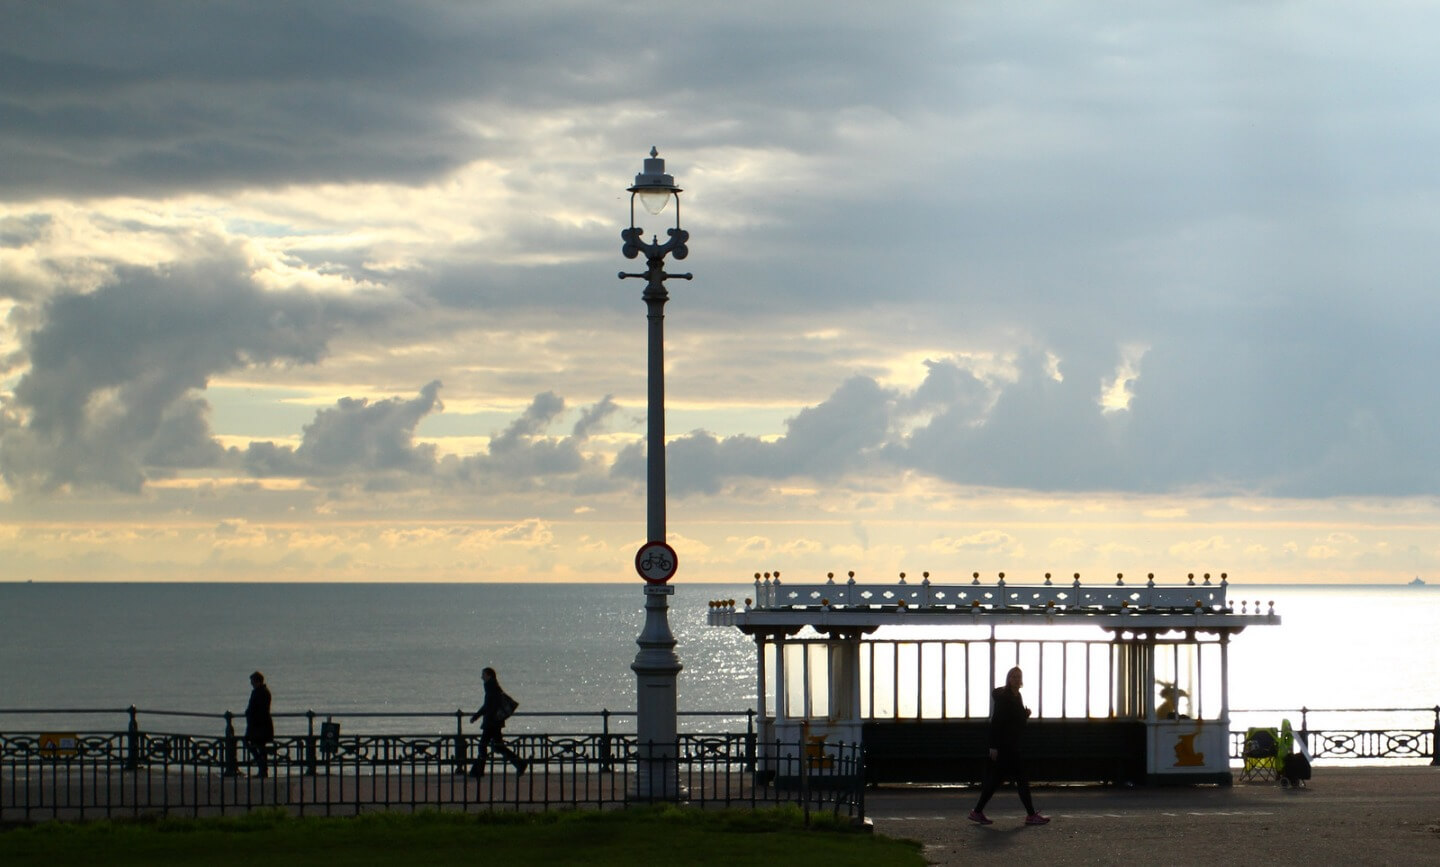 Student Accommodation in Hove, Brighton - view of the sea from Hove in the evening